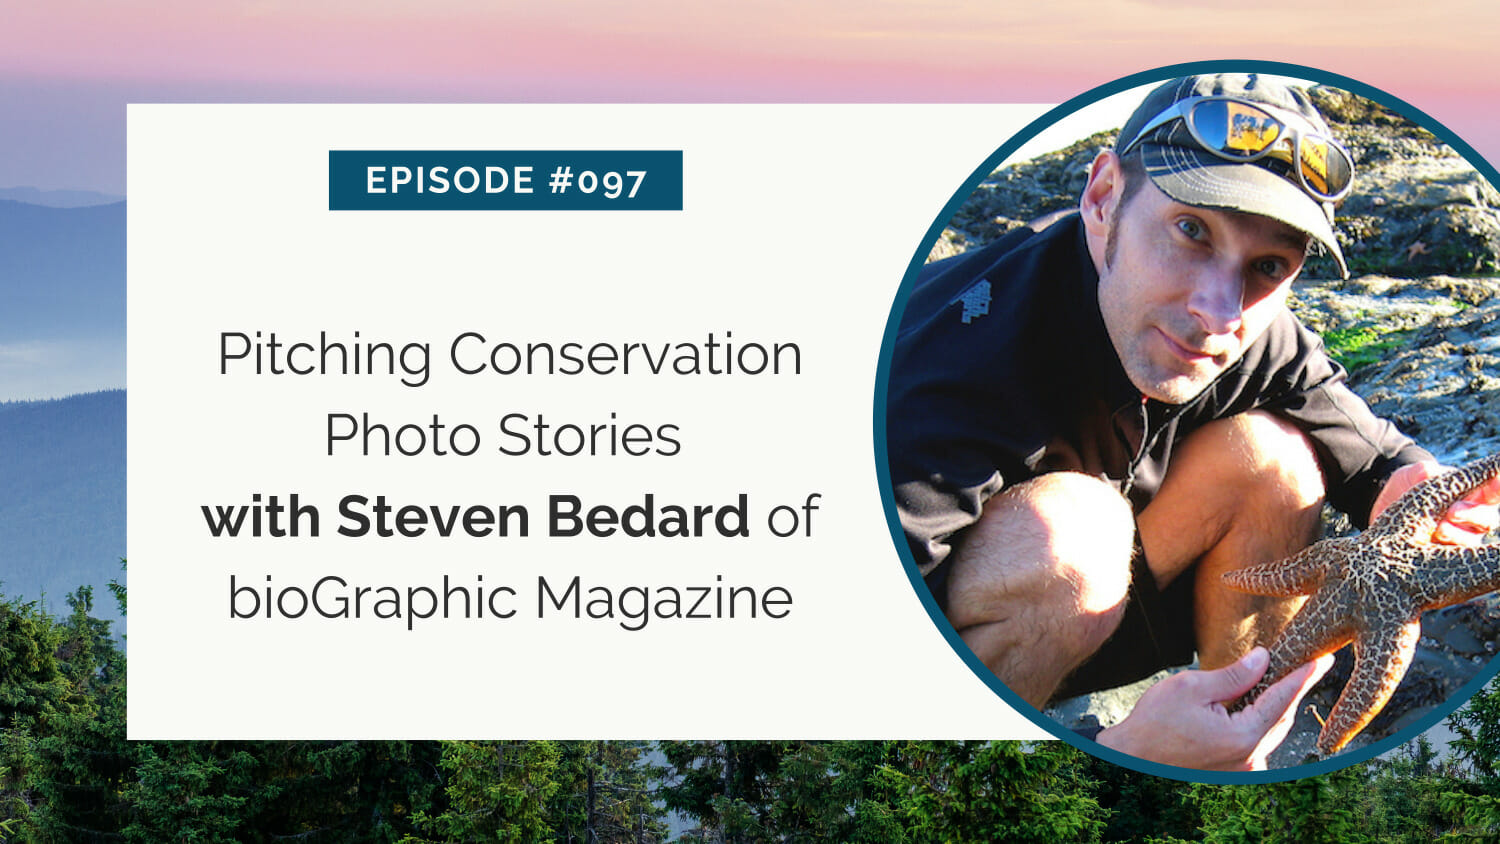 A man holding a starfish with a backdrop of a forested mountain, alongside text about an episode featuring steven bedard of biographic magazine discussing conservation photo stories.